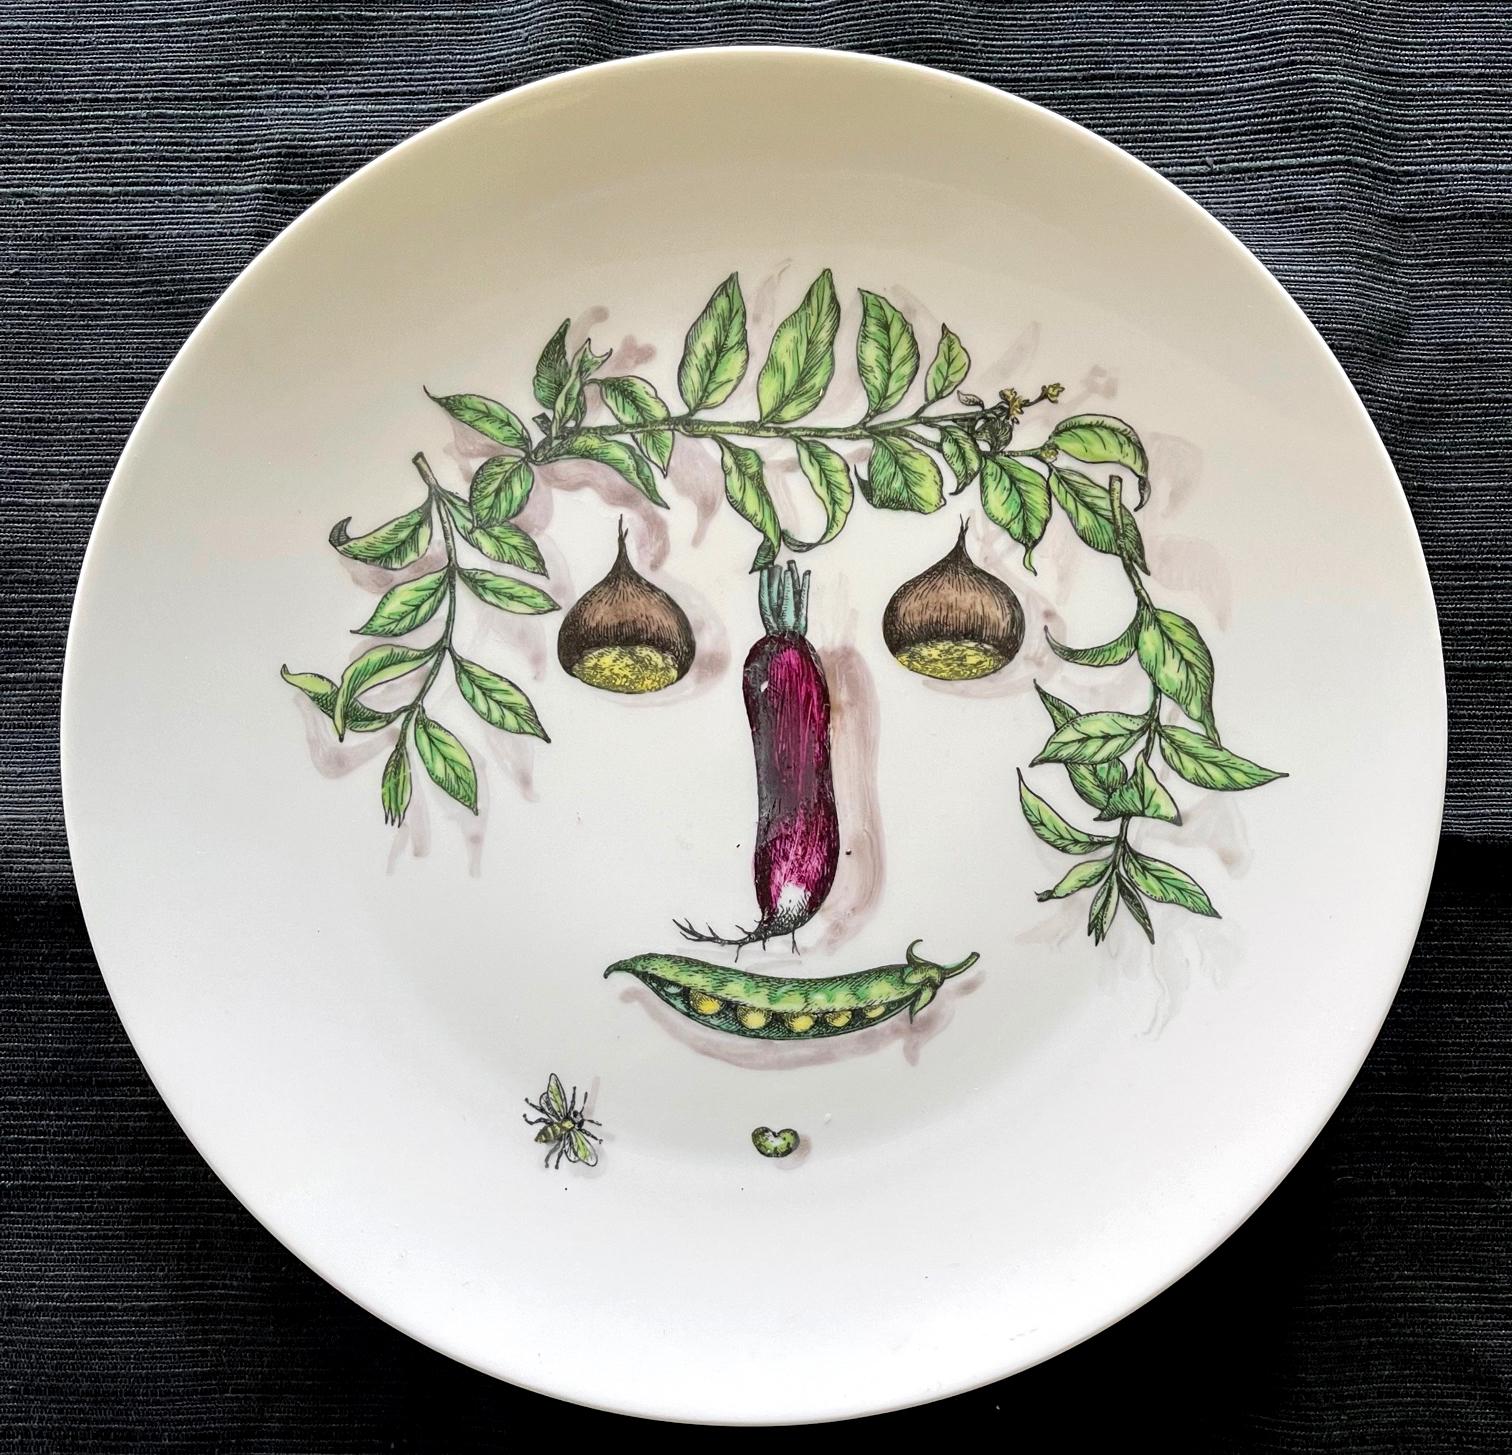 Fornasetti porcelain plate with face made with arranged vegetables. Stamped 11, Fornasetti-Milano, Made in Italy, Arcimboldesca'